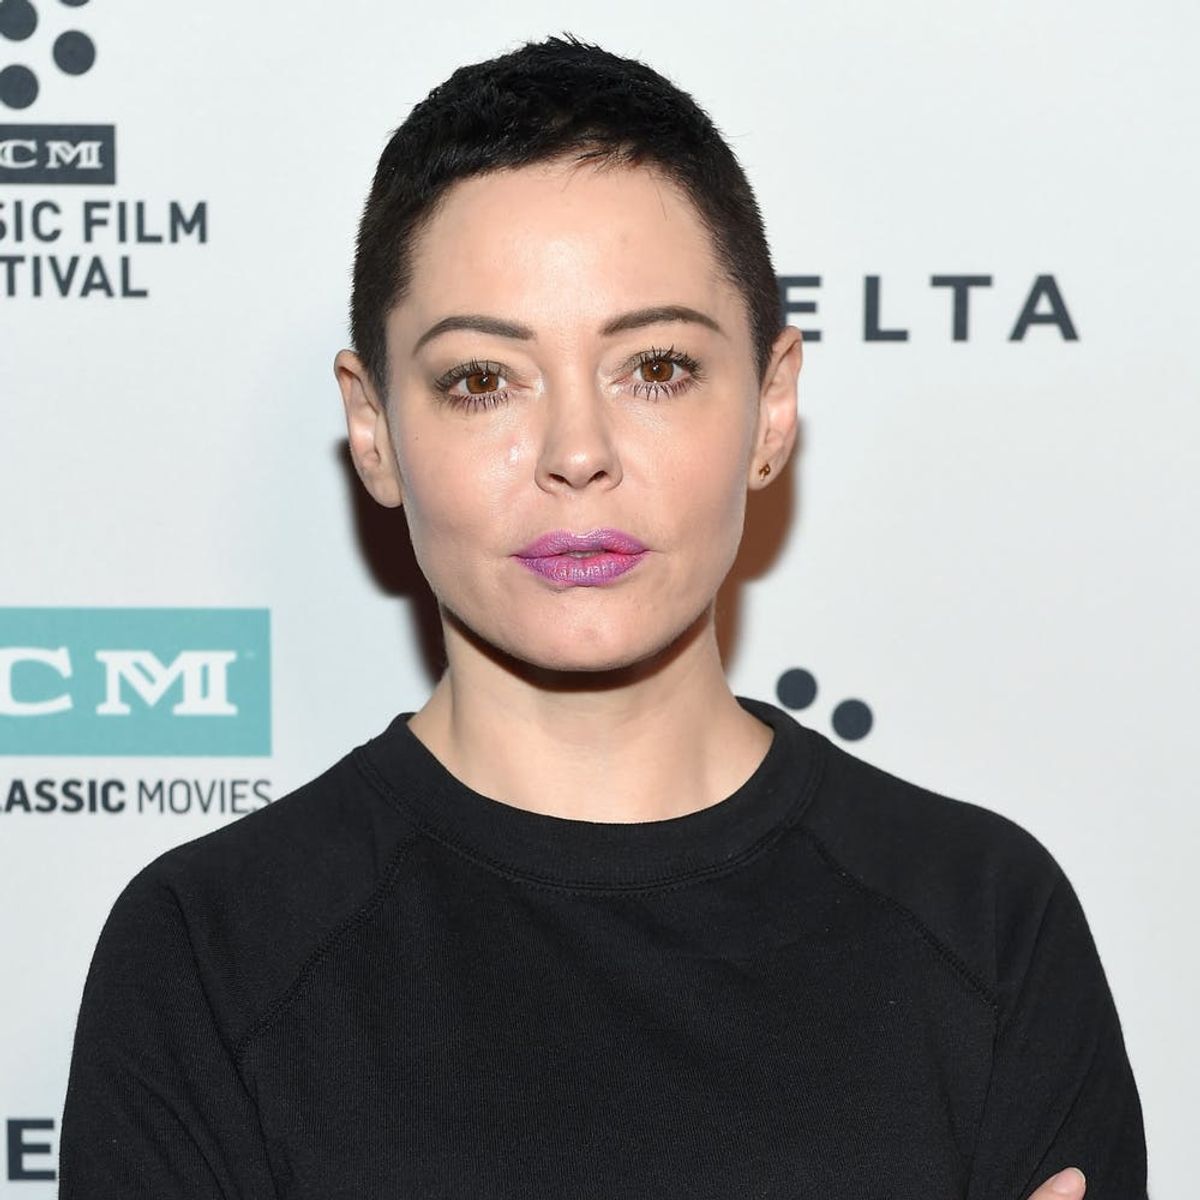 An Arrest Warrant Has Been Issued for Rose McGowan Over a Drug Charge